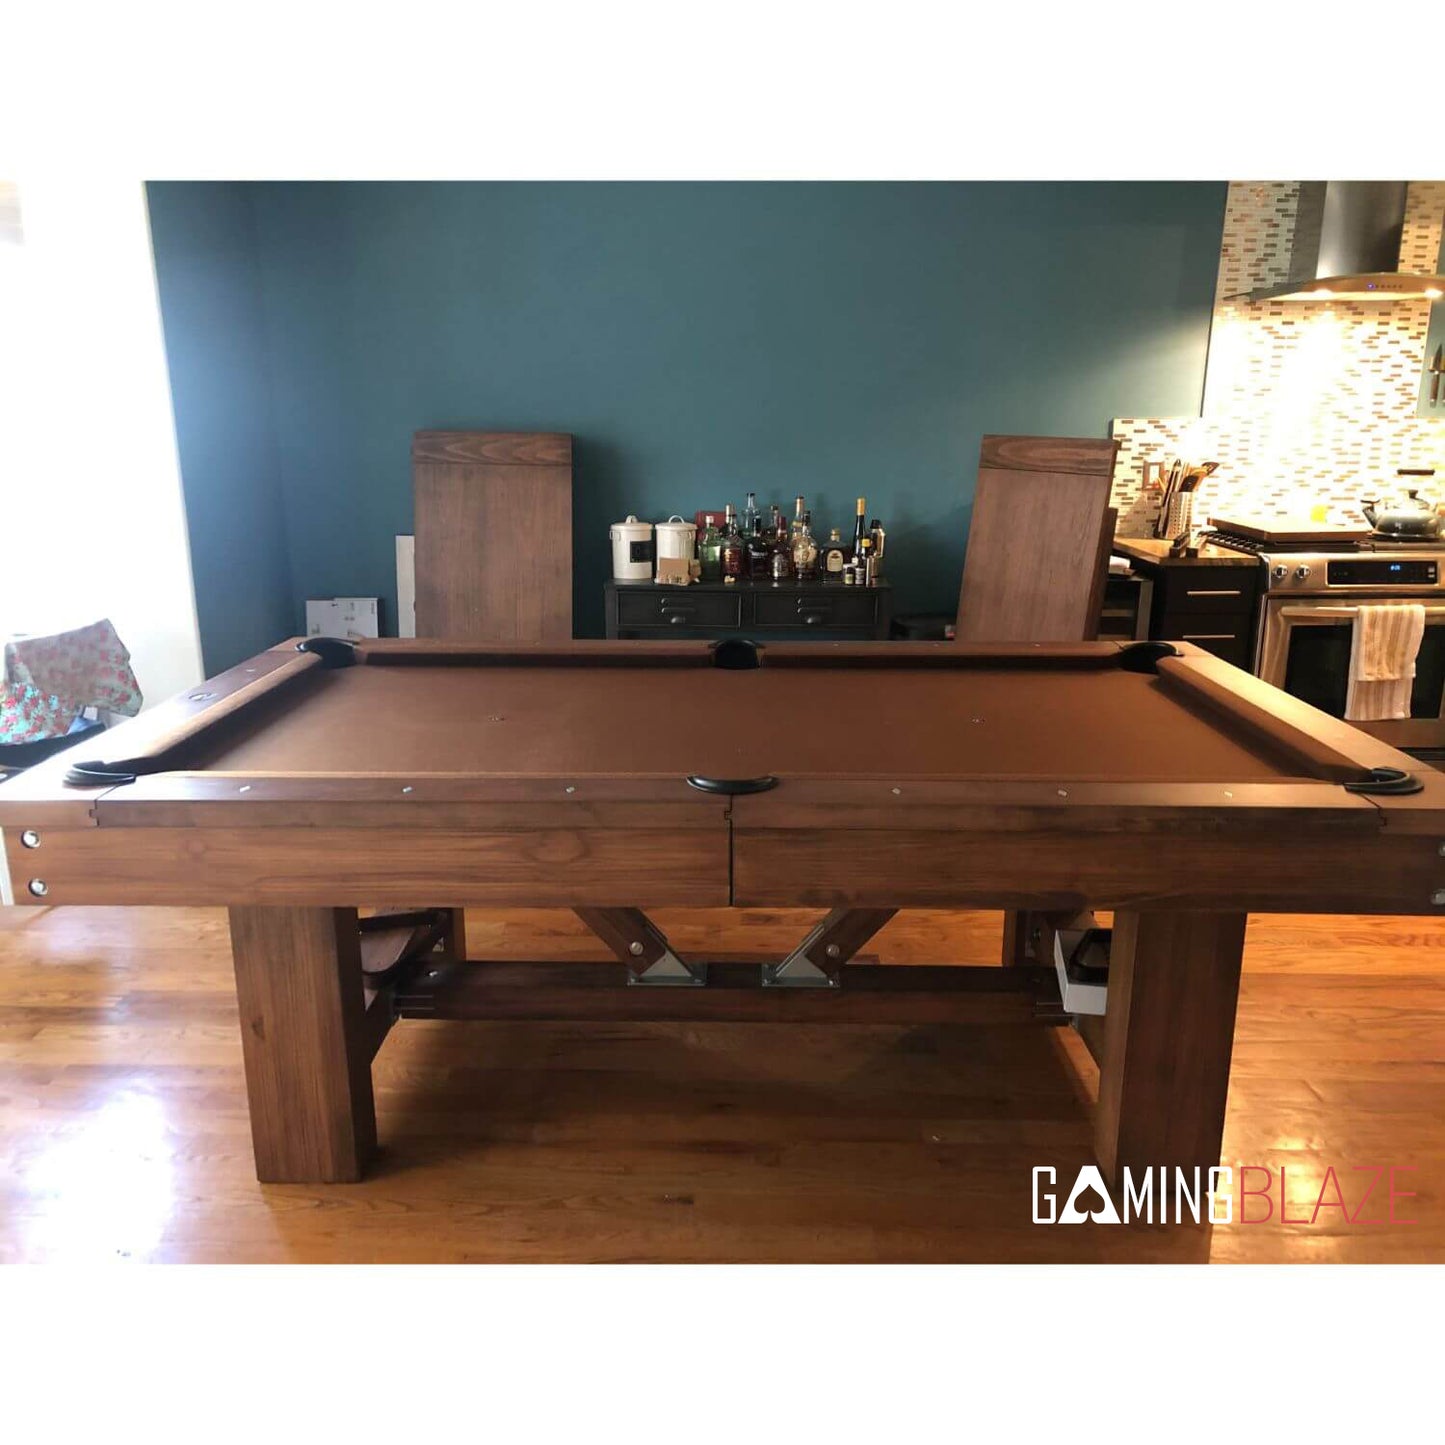 Playcraft Willow Bend Slate Pool Table w/ Dining Top & Bench